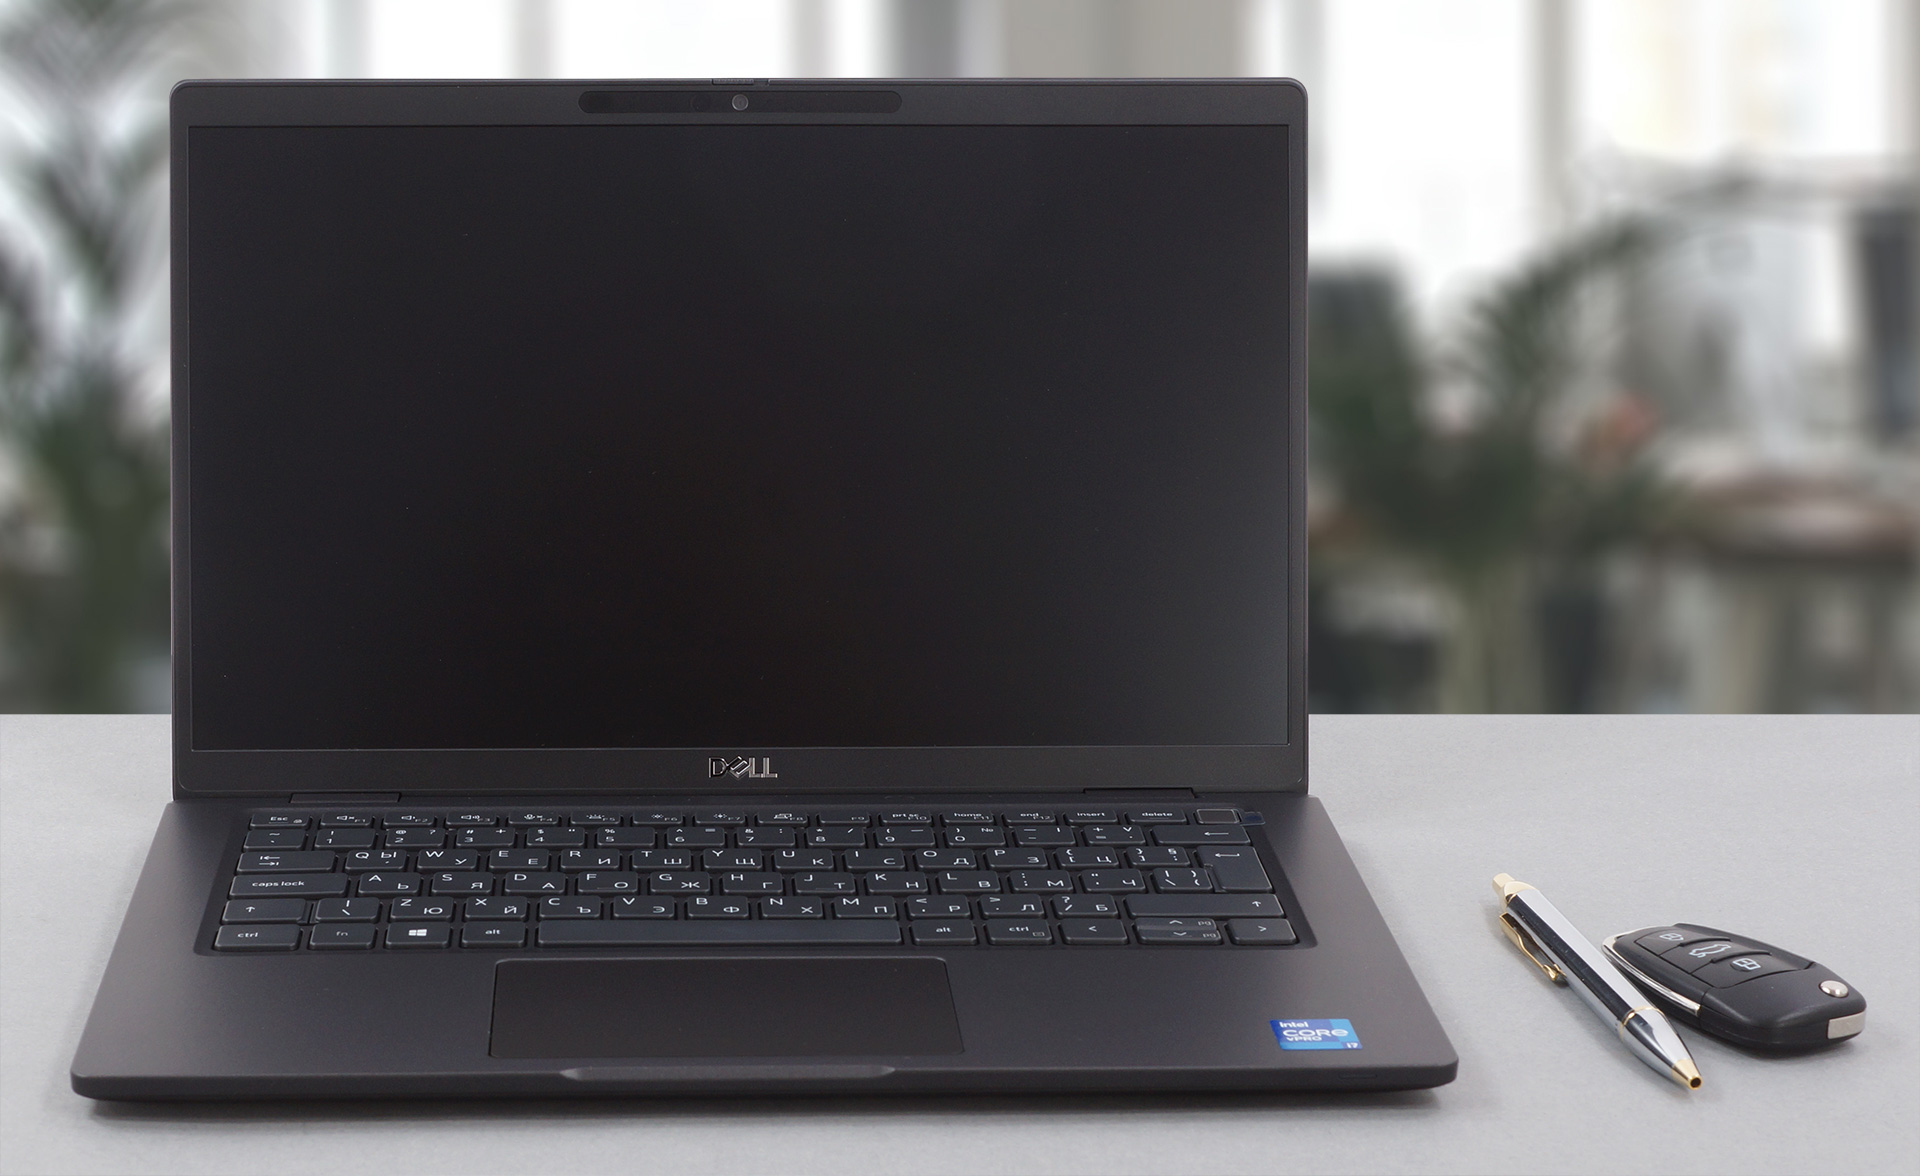 Dell Latitude 13 7320 review - once again, there is a ton of